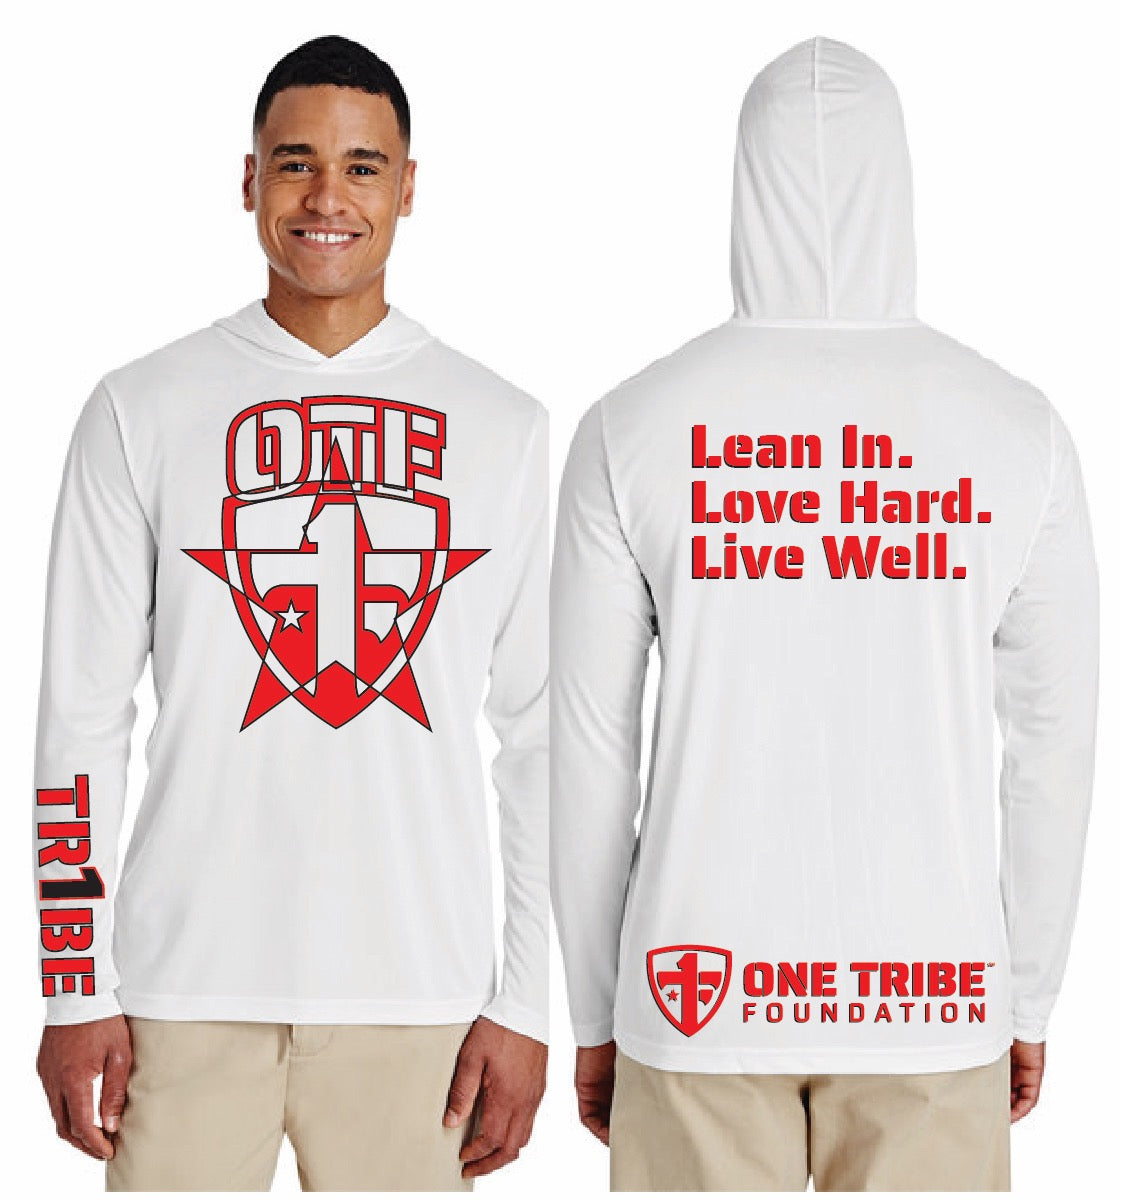 NEW One Tribe Foundation hooded fishing shirt. Lean In. Love Hard. Live Well. 